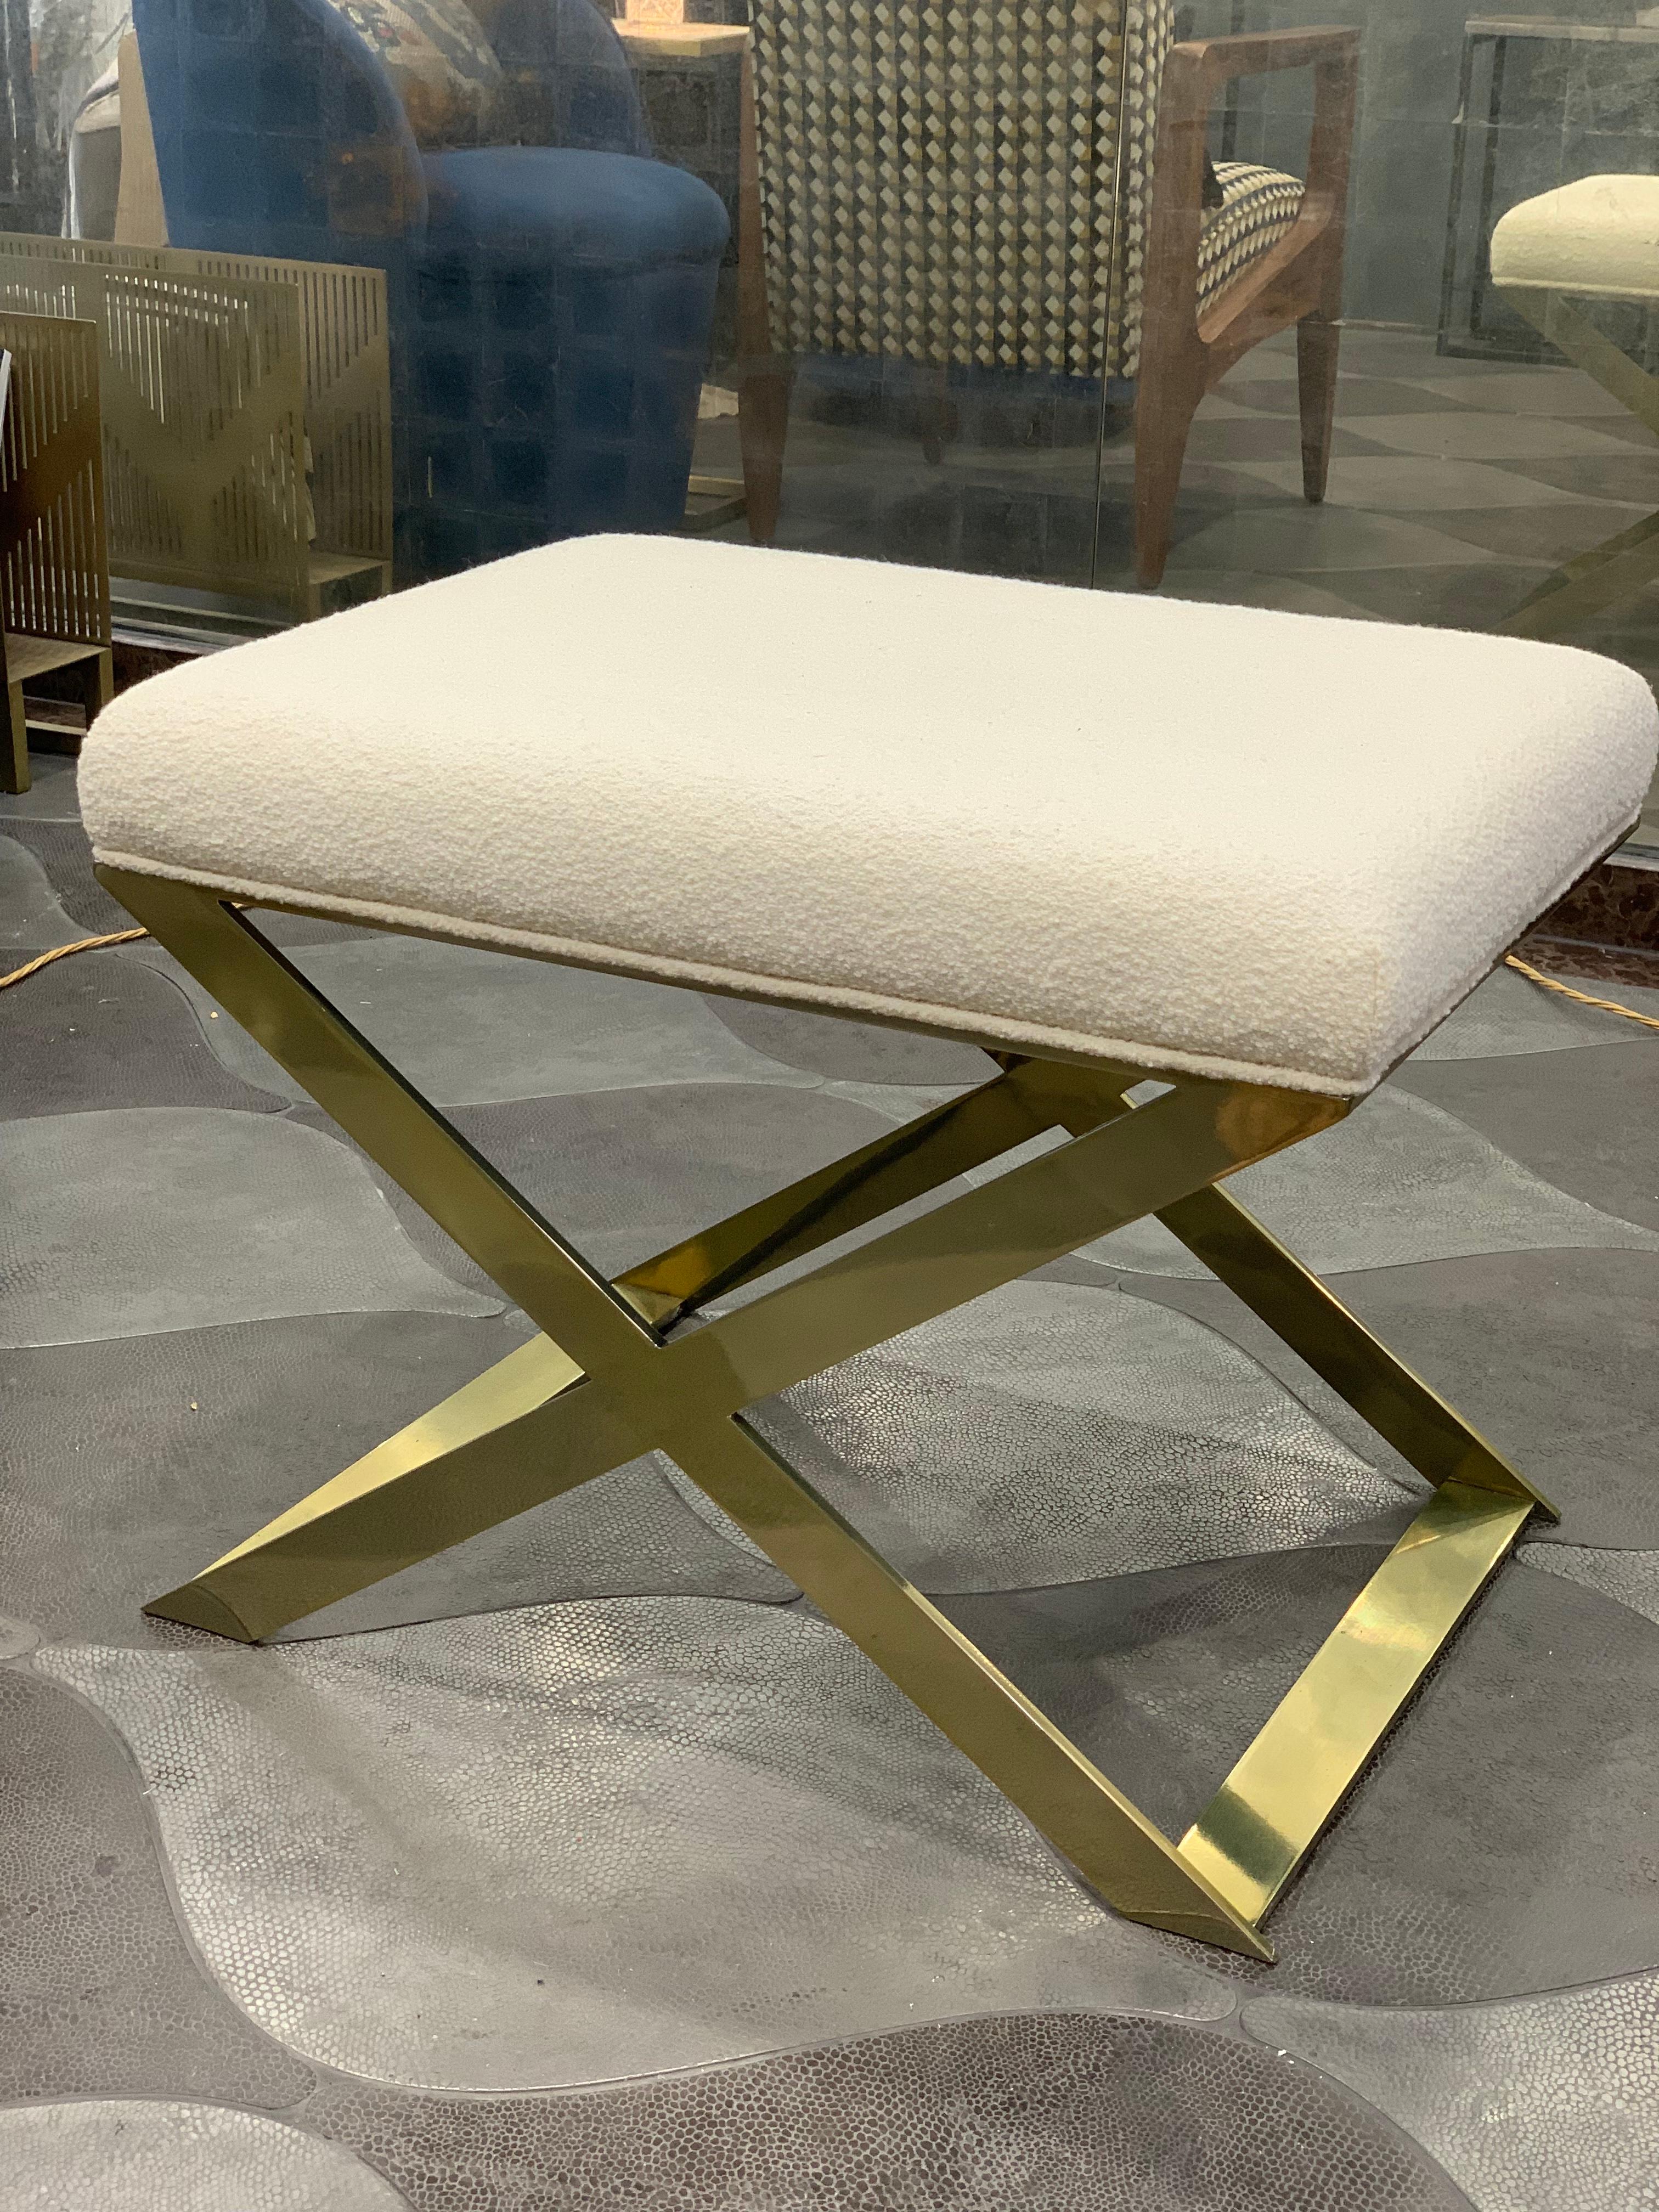 Its shape radiates dominance while its aesthetic harmonizes with Casa Botelho’s signature style, masculine glamour. The X-leg stool will complement a variety of spaces from the bedroom to the living room, with its distinctive combination of hard and